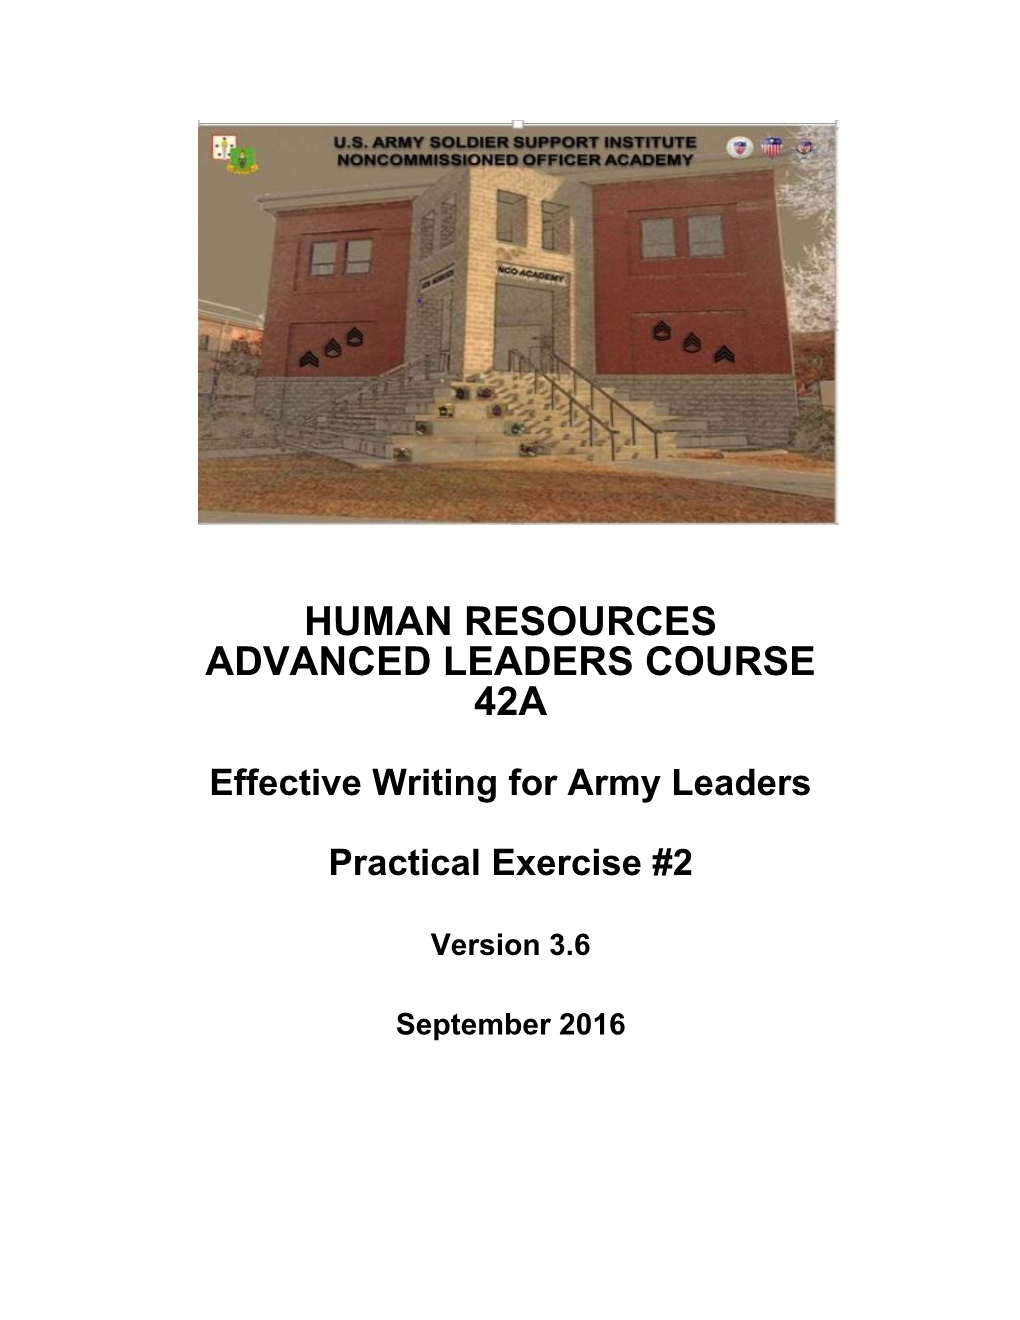 ALC Effective Writing for Army Leaders Practical Exercise 2